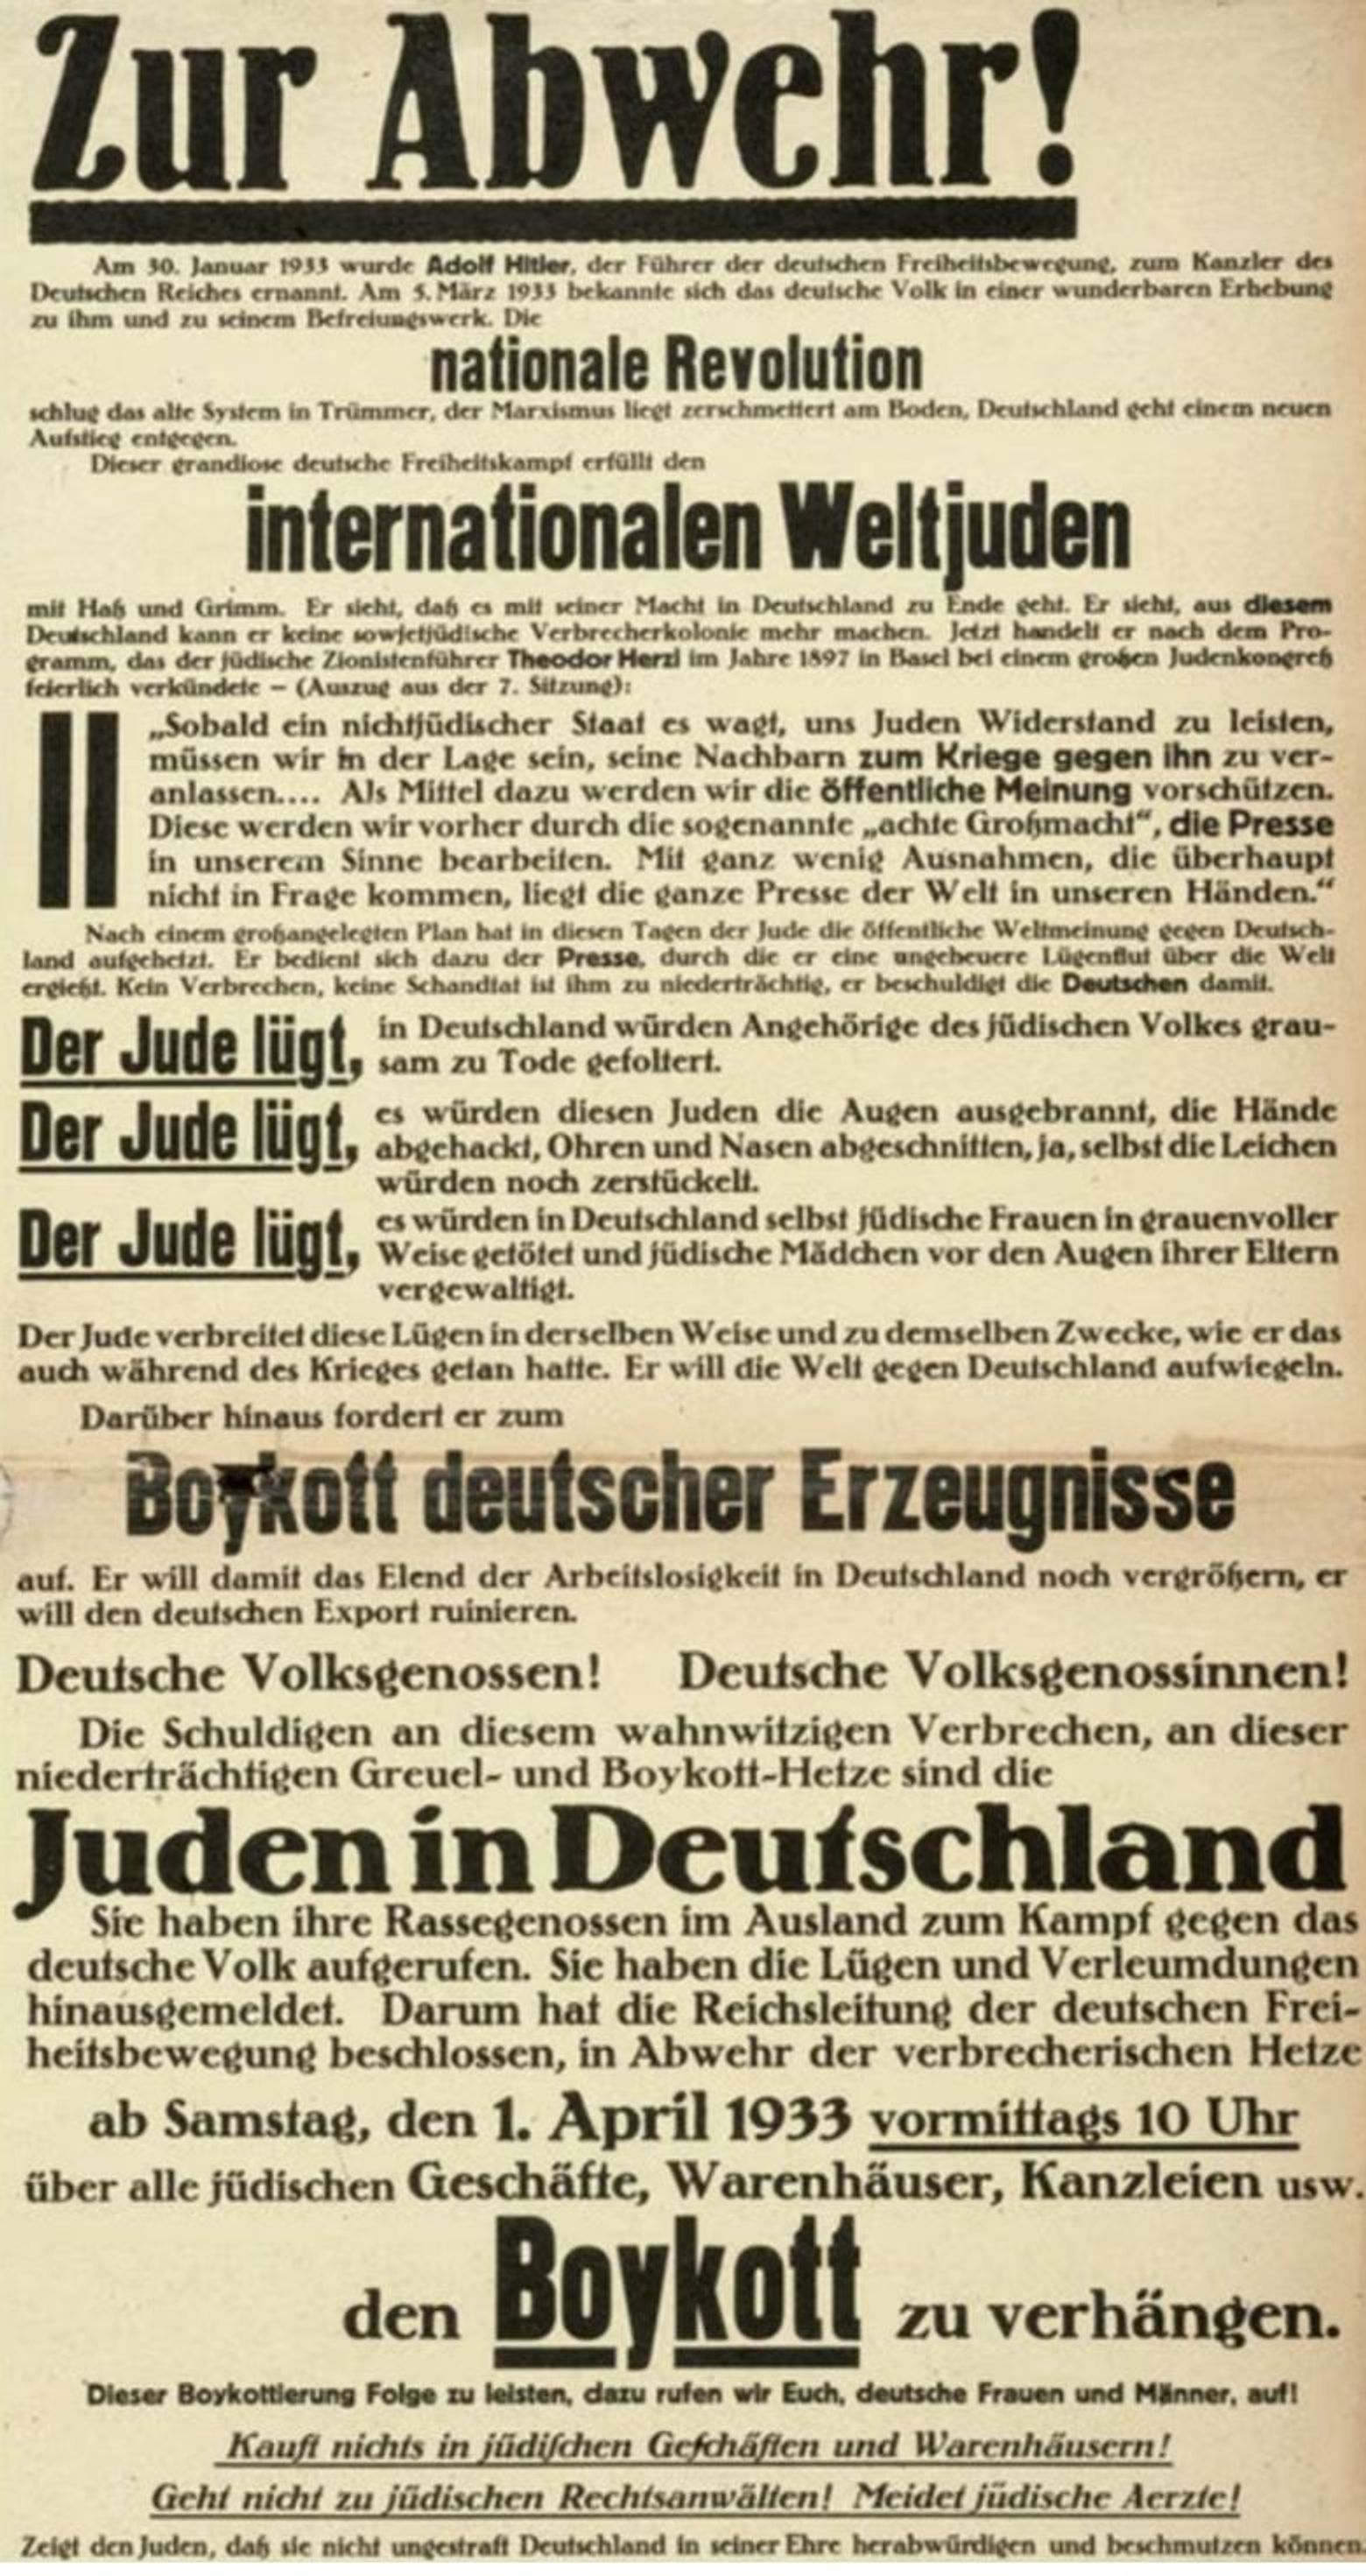 The call for boycotting Jews in Der Stürmer